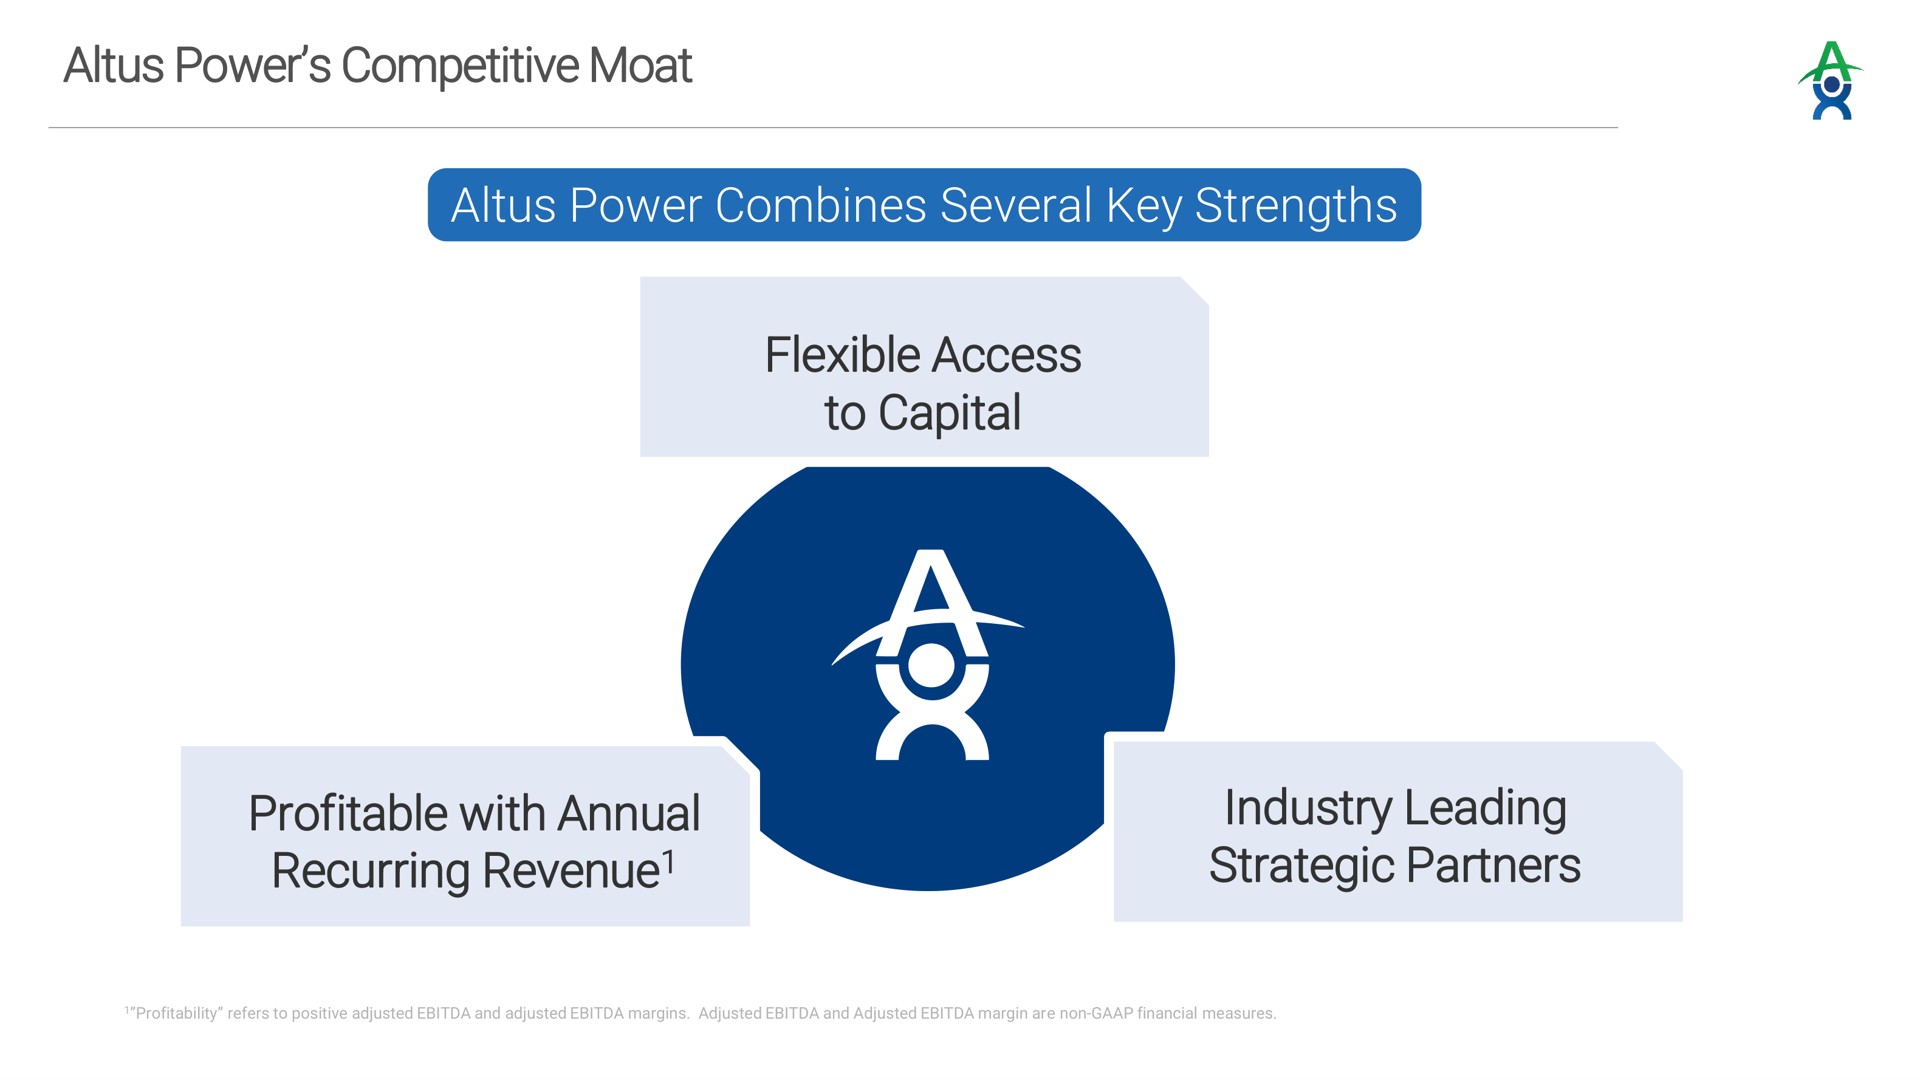 power competitive moat power combines several key strengths flexible access to capital profitable with annual recurring revenue industry leading strategic partners revenue | Altus Power